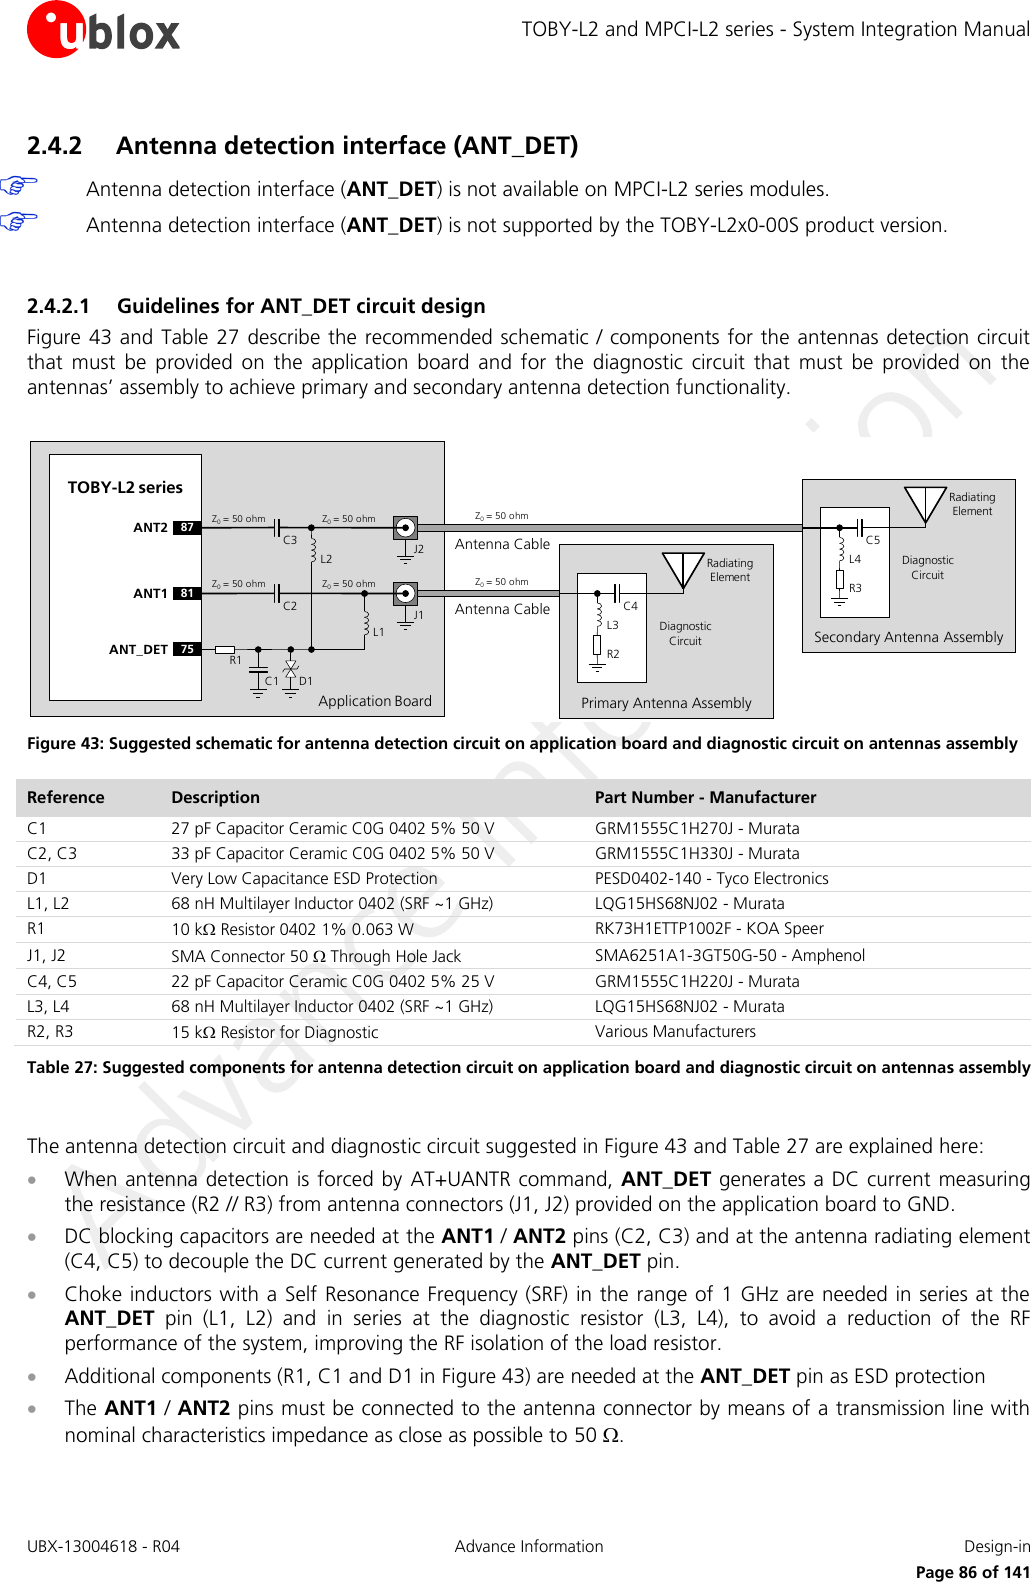 TOBY-L2 and MPCI-L2 series - System Integration Manual UBX-13004618 - R04  Advance Information  Design-in     Page 86 of 141 2.4.2 Antenna detection interface (ANT_DET)  Antenna detection interface (ANT_DET) is not available on MPCI-L2 series modules.  Antenna detection interface (ANT_DET) is not supported by the TOBY-L2x0-00S product version.  2.4.2.1 Guidelines for ANT_DET circuit design Figure 43 and Table 27 describe the recommended schematic / components for the antennas detection circuit that  must  be  provided  on  the  application  board  and  for  the  diagnostic  circuit  that  must  be  provided  on  the antennas’ assembly to achieve primary and secondary antenna detection functionality.  Application BoardAntenna CableTOBY-L2 series81ANT175ANT_DET R1C1 D1C2 J1Z0= 50 ohm Z0= 50 ohm Z0= 50 ohmPrimary Antenna AssemblyR2C4L3Radiating ElementDiagnostic CircuitL2L1Antenna Cable87ANT2C3 J2Z0= 50 ohm Z0= 50 ohm Z0= 50 ohmSecondary Antenna AssemblyR3C5L4Radiating ElementDiagnostic Circuit Figure 43: Suggested schematic for antenna detection circuit on application board and diagnostic circuit on antennas assembly Reference Description Part Number - Manufacturer C1 27 pF Capacitor Ceramic C0G 0402 5% 50 V GRM1555C1H270J - Murata C2, C3 33 pF Capacitor Ceramic C0G 0402 5% 50 V GRM1555C1H330J - Murata D1 Very Low Capacitance ESD Protection PESD0402-140 - Tyco Electronics L1, L2 68 nH Multilayer Inductor 0402 (SRF ~1 GHz) LQG15HS68NJ02 - Murata R1 10 k Resistor 0402 1% 0.063 W RK73H1ETTP1002F - KOA Speer J1, J2 SMA Connector 50  Through Hole Jack SMA6251A1-3GT50G-50 - Amphenol C4, C5 22 pF Capacitor Ceramic C0G 0402 5% 25 V  GRM1555C1H220J - Murata L3, L4 68 nH Multilayer Inductor 0402 (SRF ~1 GHz) LQG15HS68NJ02 - Murata R2, R3 15 k Resistor for Diagnostic Various Manufacturers Table 27: Suggested components for antenna detection circuit on application board and diagnostic circuit on antennas assembly  The antenna detection circuit and diagnostic circuit suggested in Figure 43 and Table 27 are explained here:  When antenna detection is forced by AT+UANTR command, ANT_DET generates a DC current measuring the resistance (R2 // R3) from antenna connectors (J1, J2) provided on the application board to GND.  DC blocking capacitors are needed at the ANT1 / ANT2 pins (C2, C3) and at the antenna radiating element (C4, C5) to decouple the DC current generated by the ANT_DET pin.  Choke inductors with a Self Resonance Frequency (SRF) in the range of 1 GHz are needed in series at the ANT_DET  pin  (L1,  L2)  and  in  series  at  the  diagnostic  resistor  (L3,  L4),  to  avoid  a  reduction  of  the  RF performance of the system, improving the RF isolation of the load resistor.   Additional components (R1, C1 and D1 in Figure 43) are needed at the ANT_DET pin as ESD protection  The ANT1 / ANT2 pins must be connected to the antenna connector by means of a transmission line with nominal characteristics impedance as close as possible to 50 .  